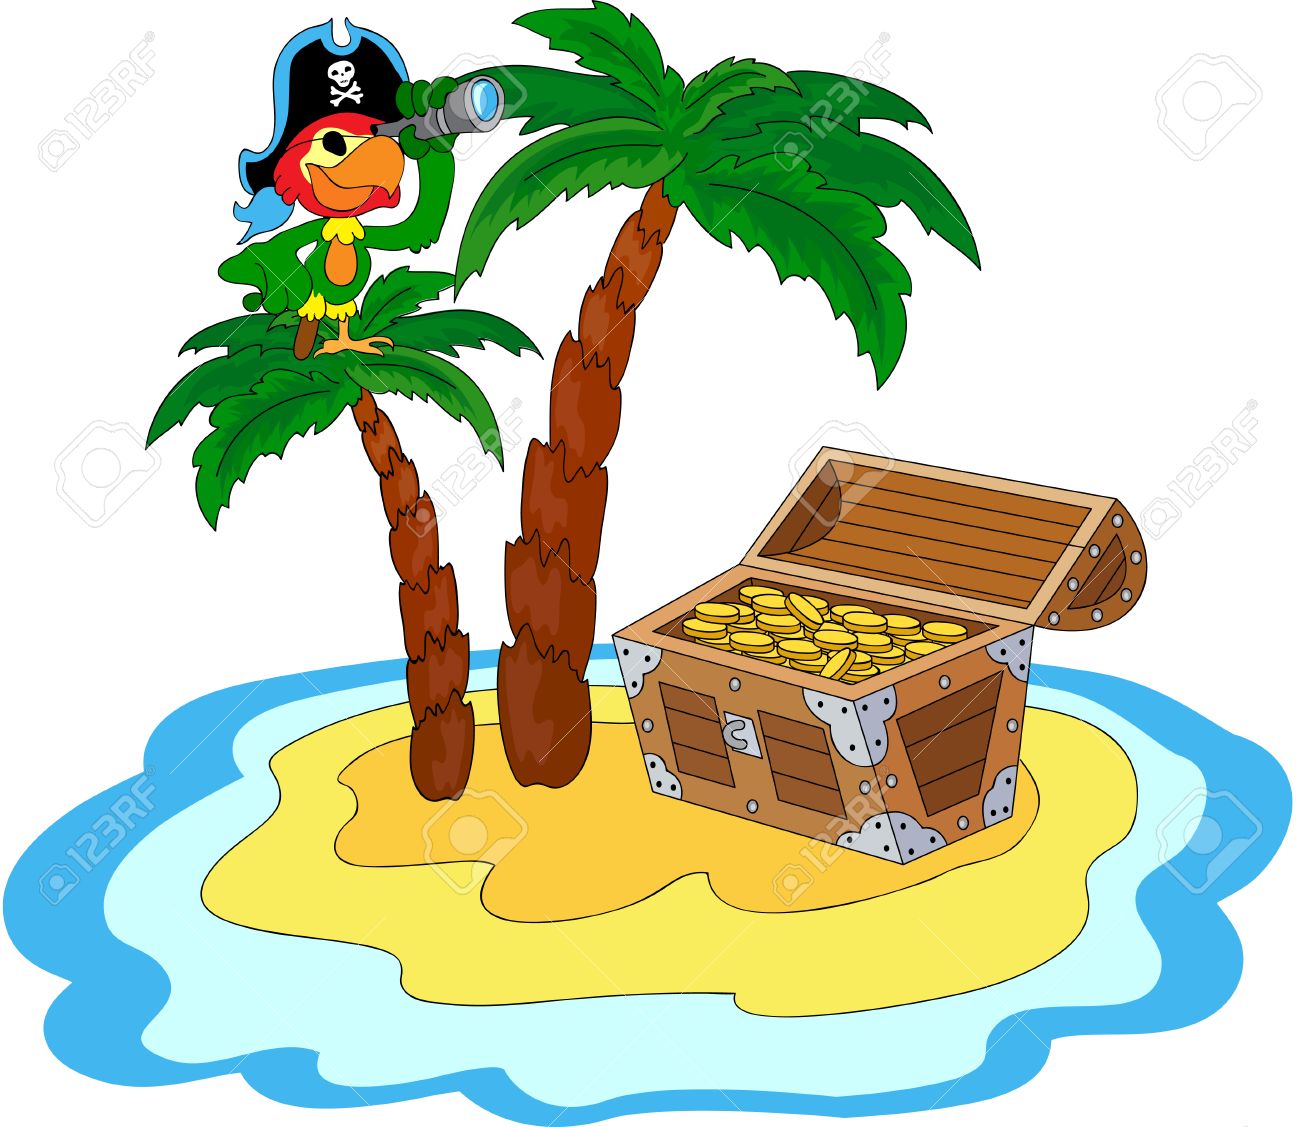 Treasure chest, pirate parrot and palms on the island